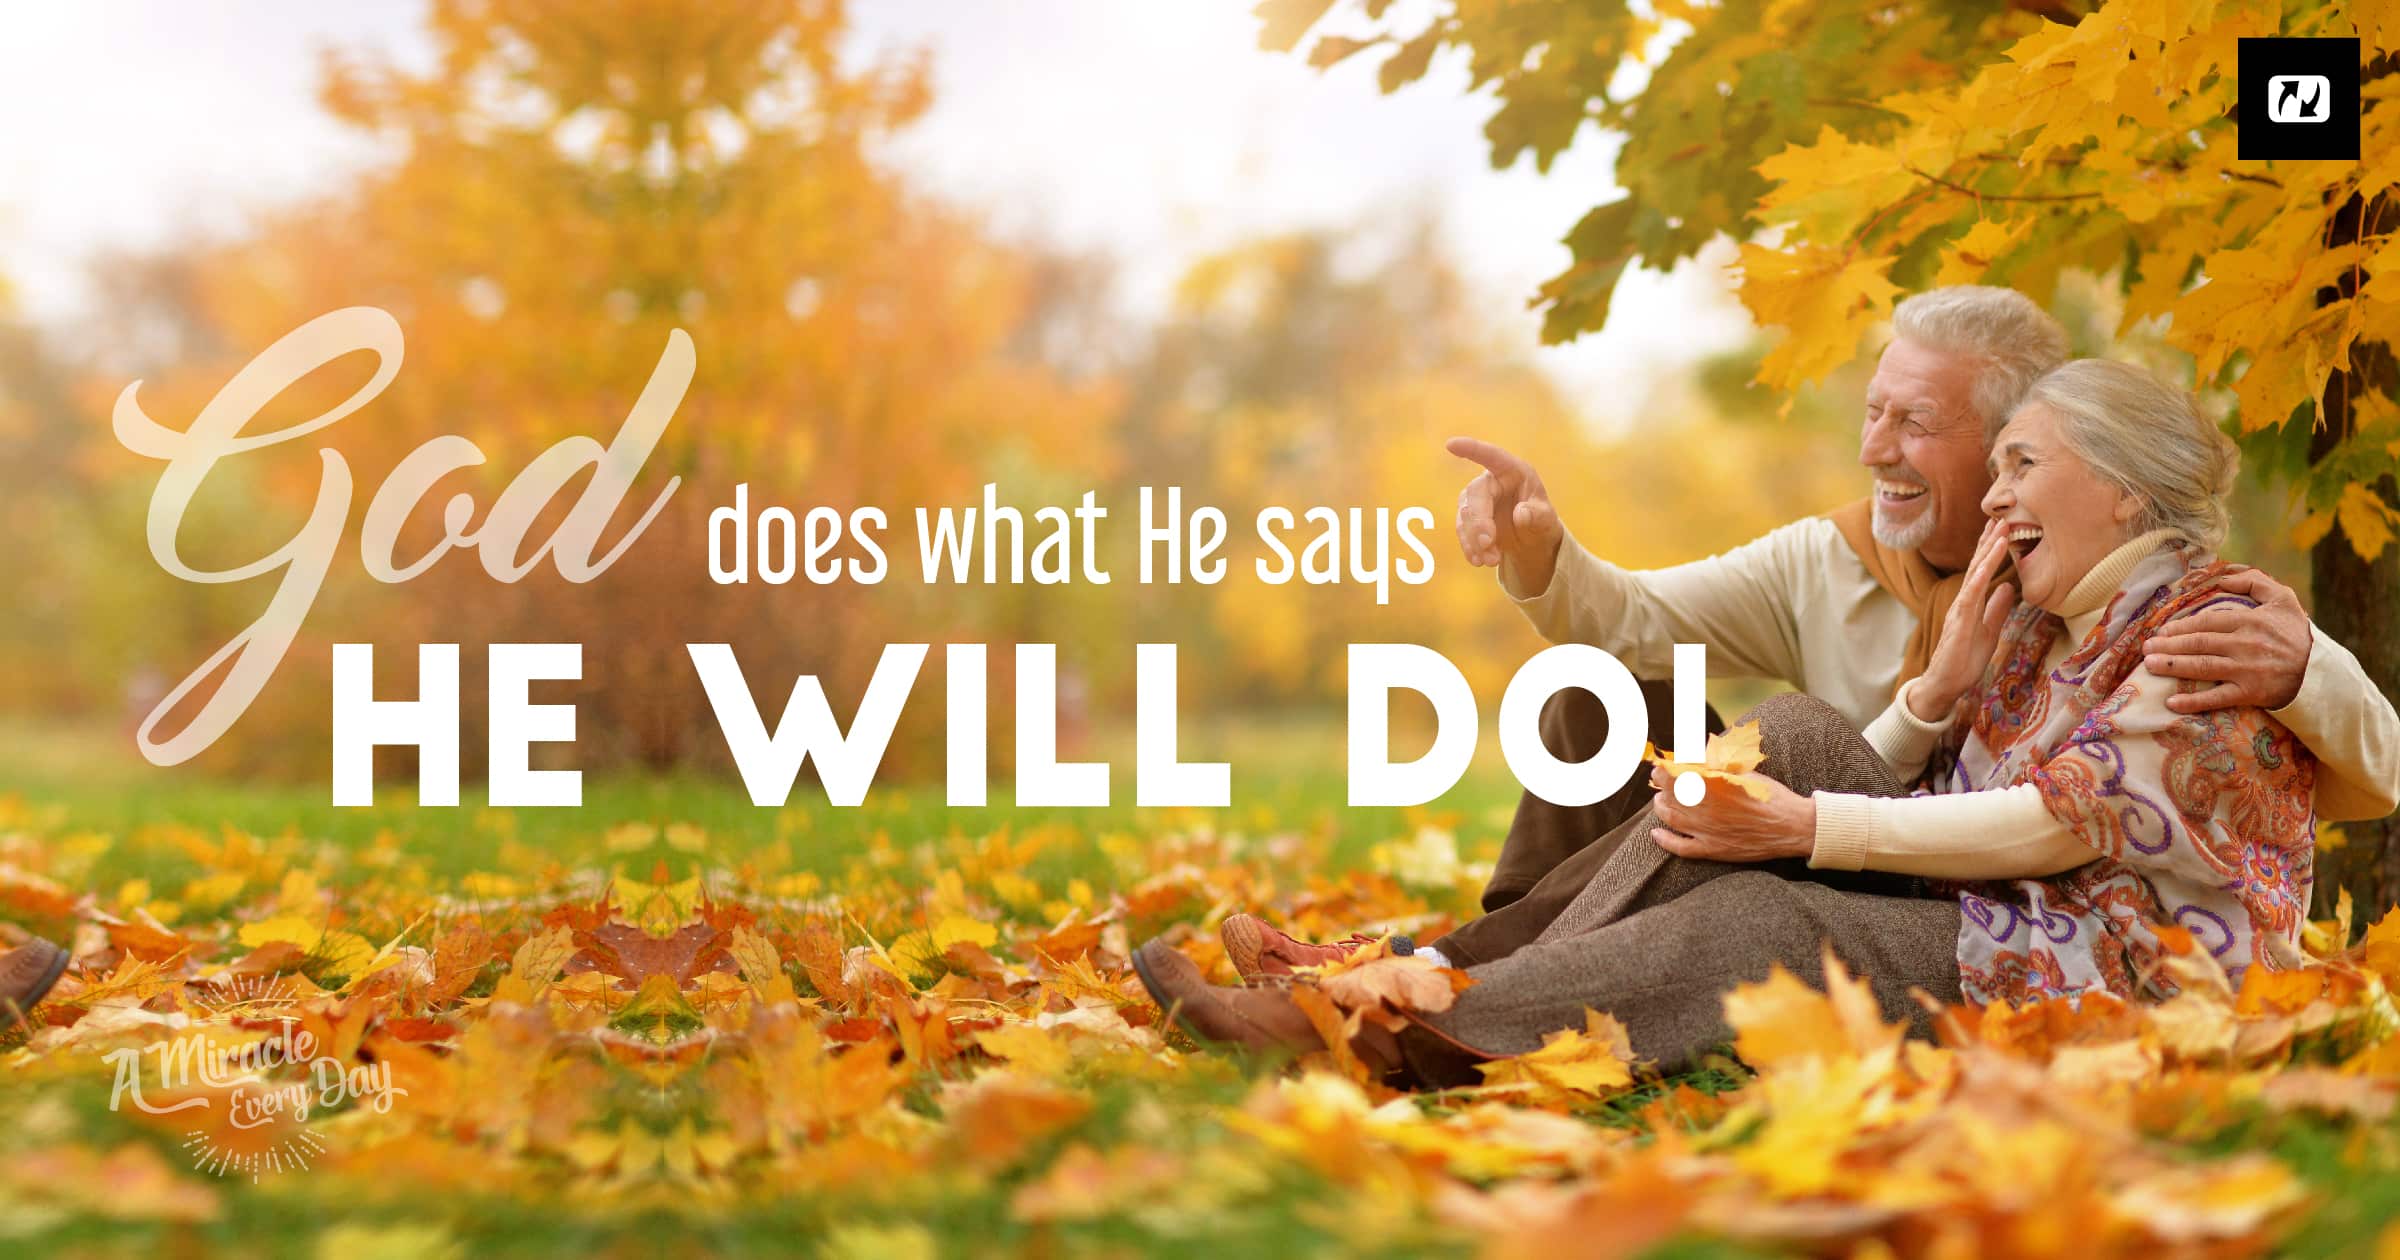 God will accomplish what He has promised you! | Jesus.net